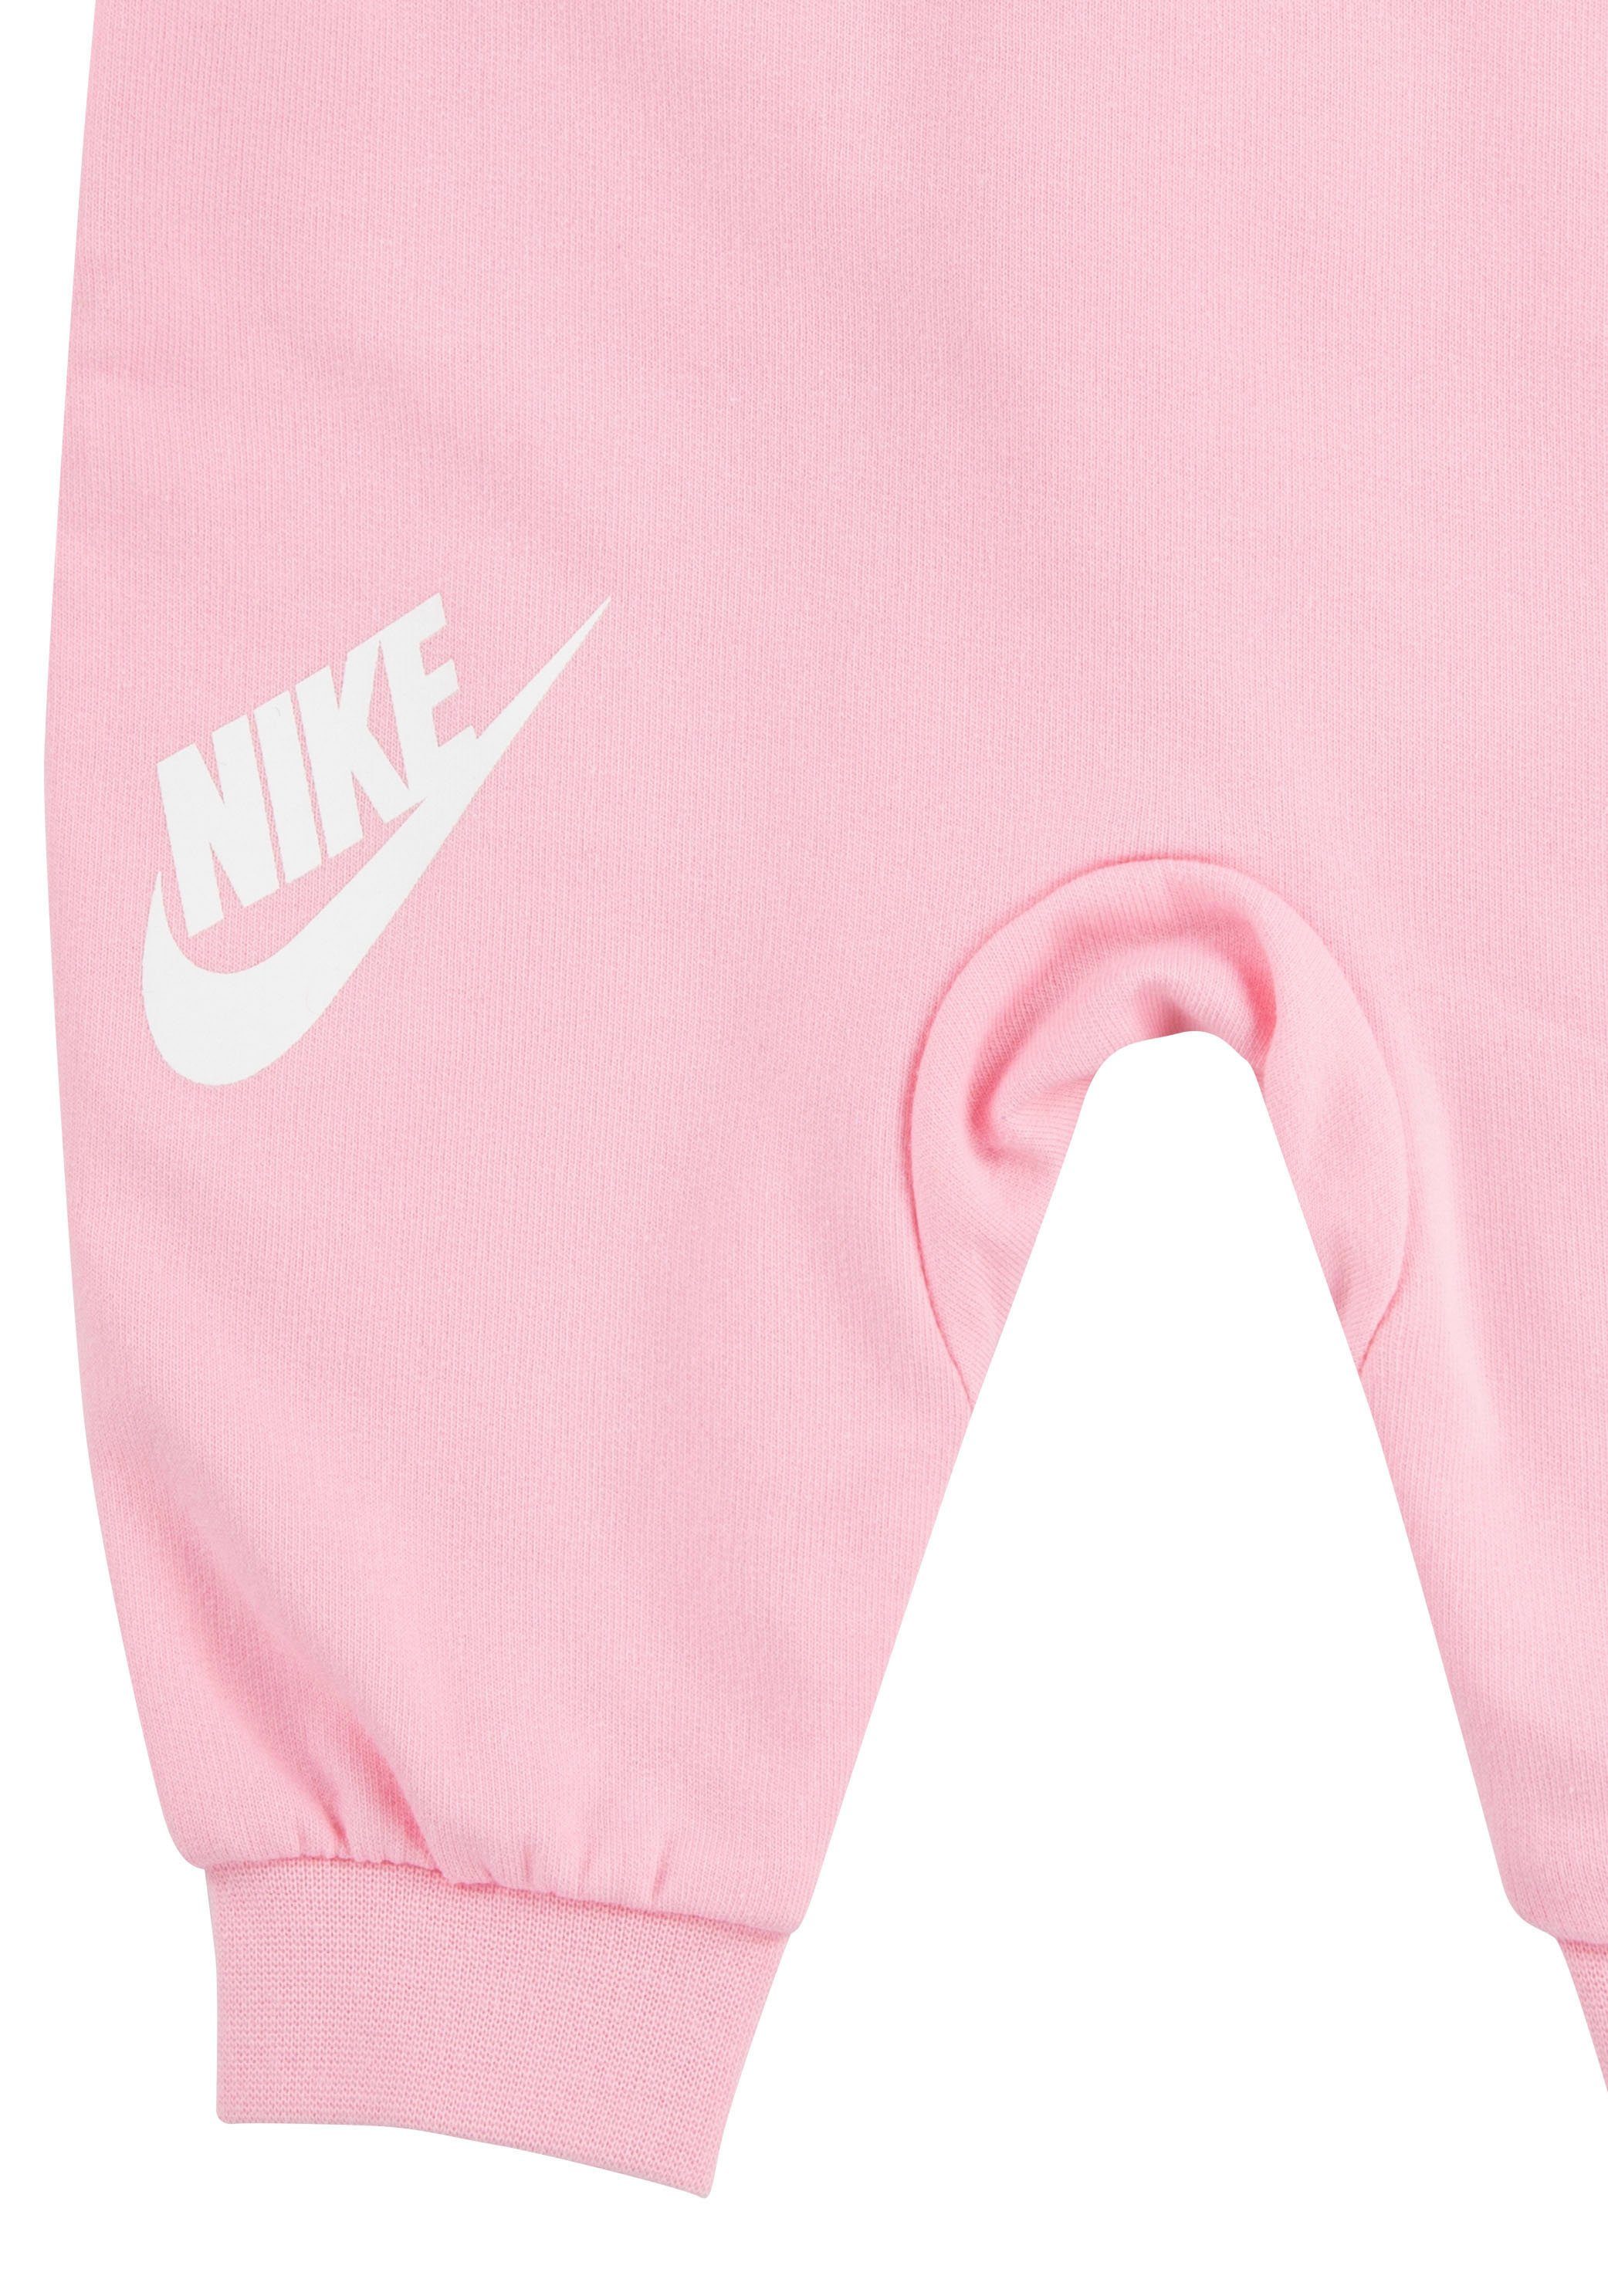 Nike Sportswear Strampler NKN ALL DAY rosa-weiß PLAY COVERALL